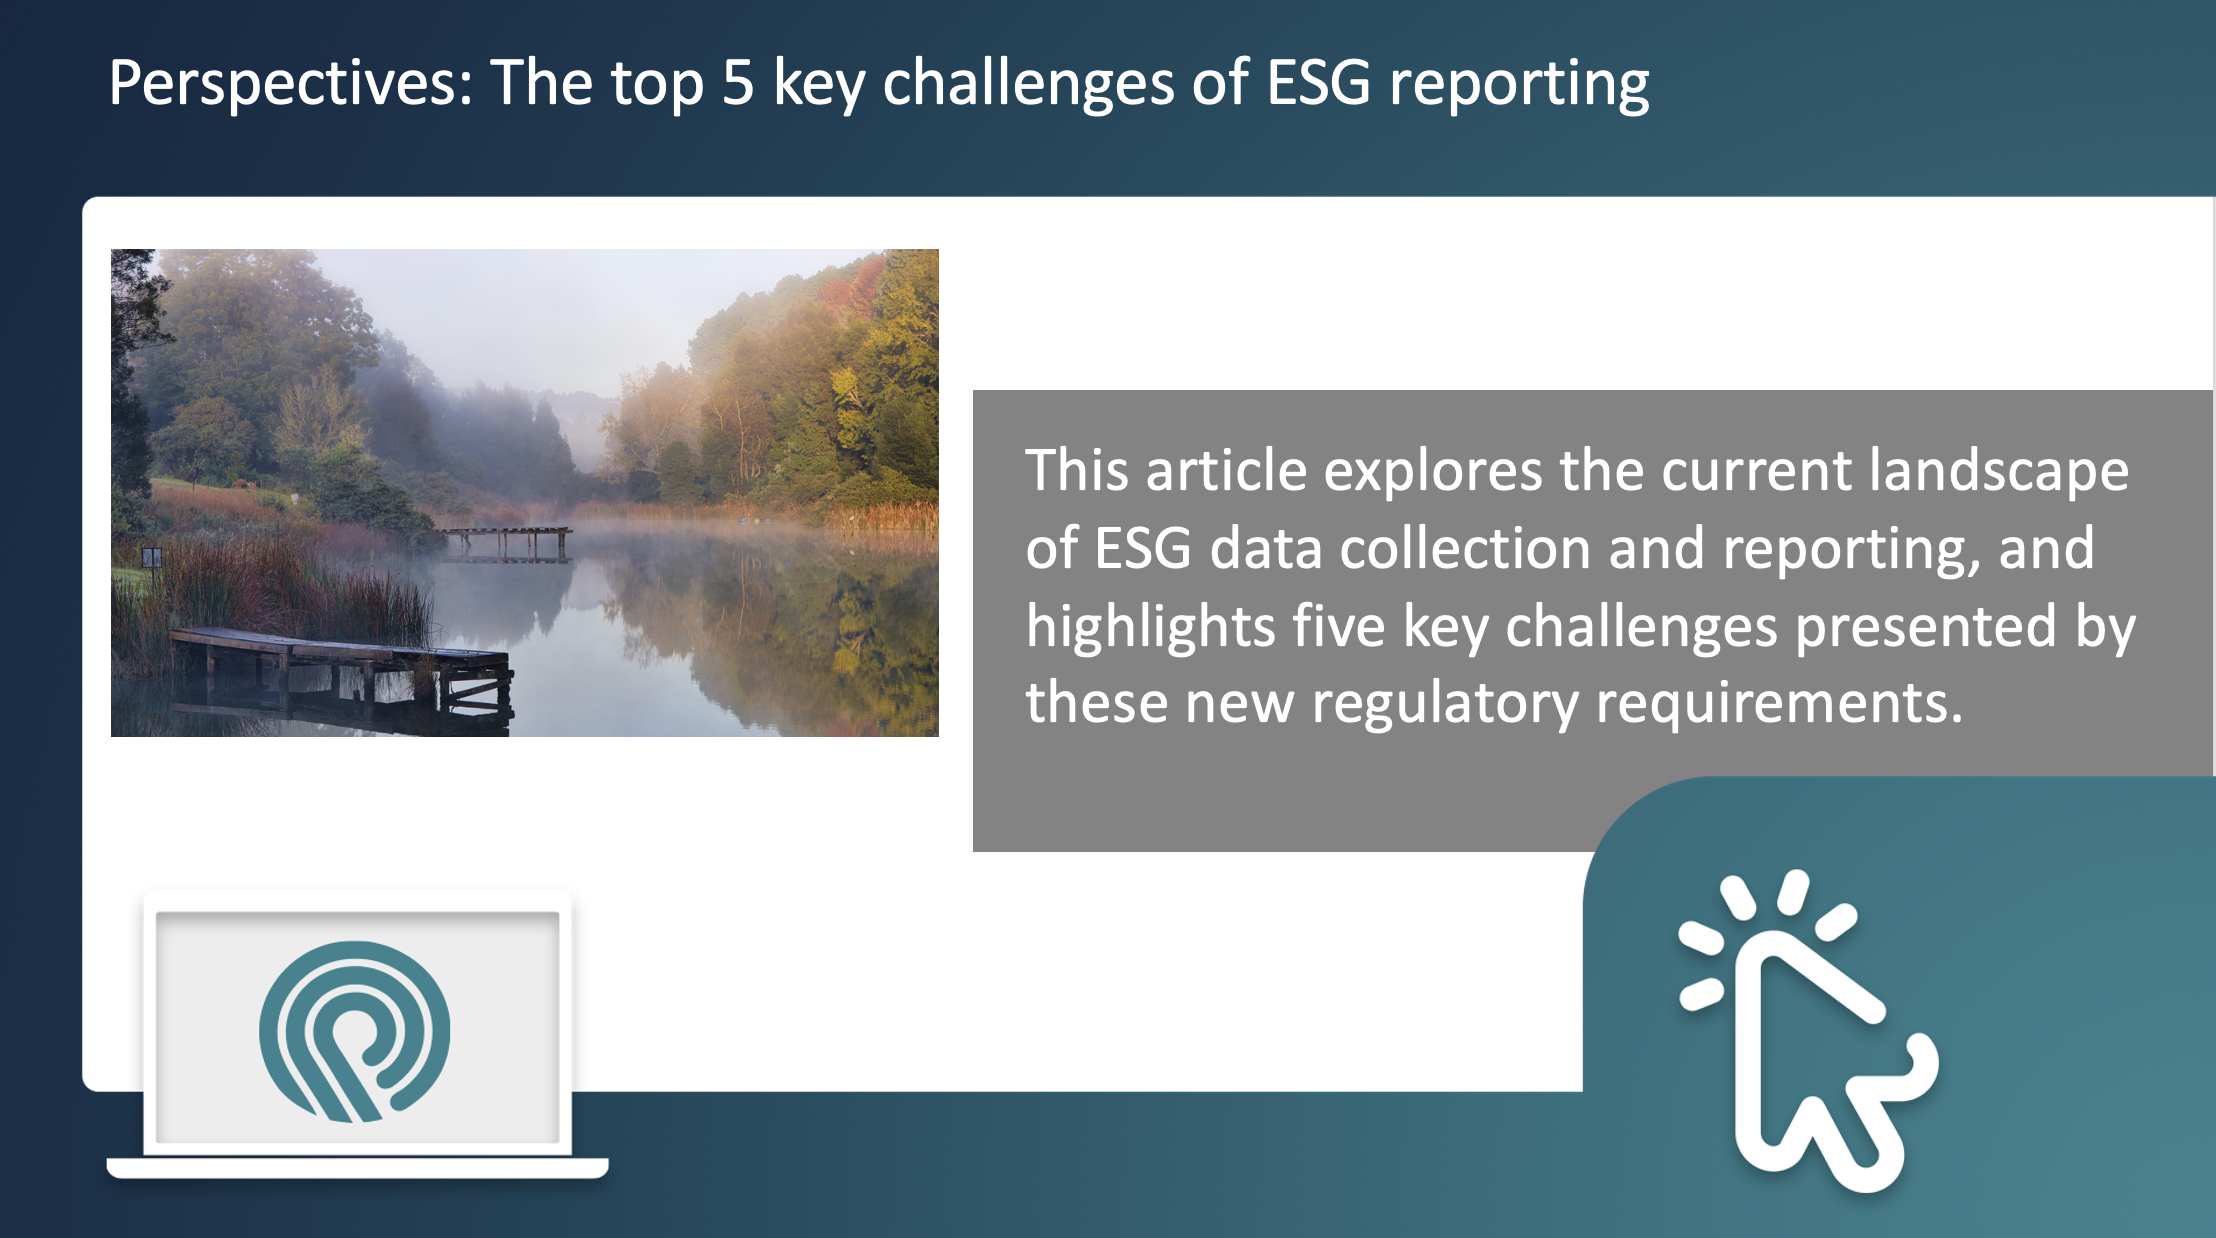 The top 5 key challenges of ESG reporting